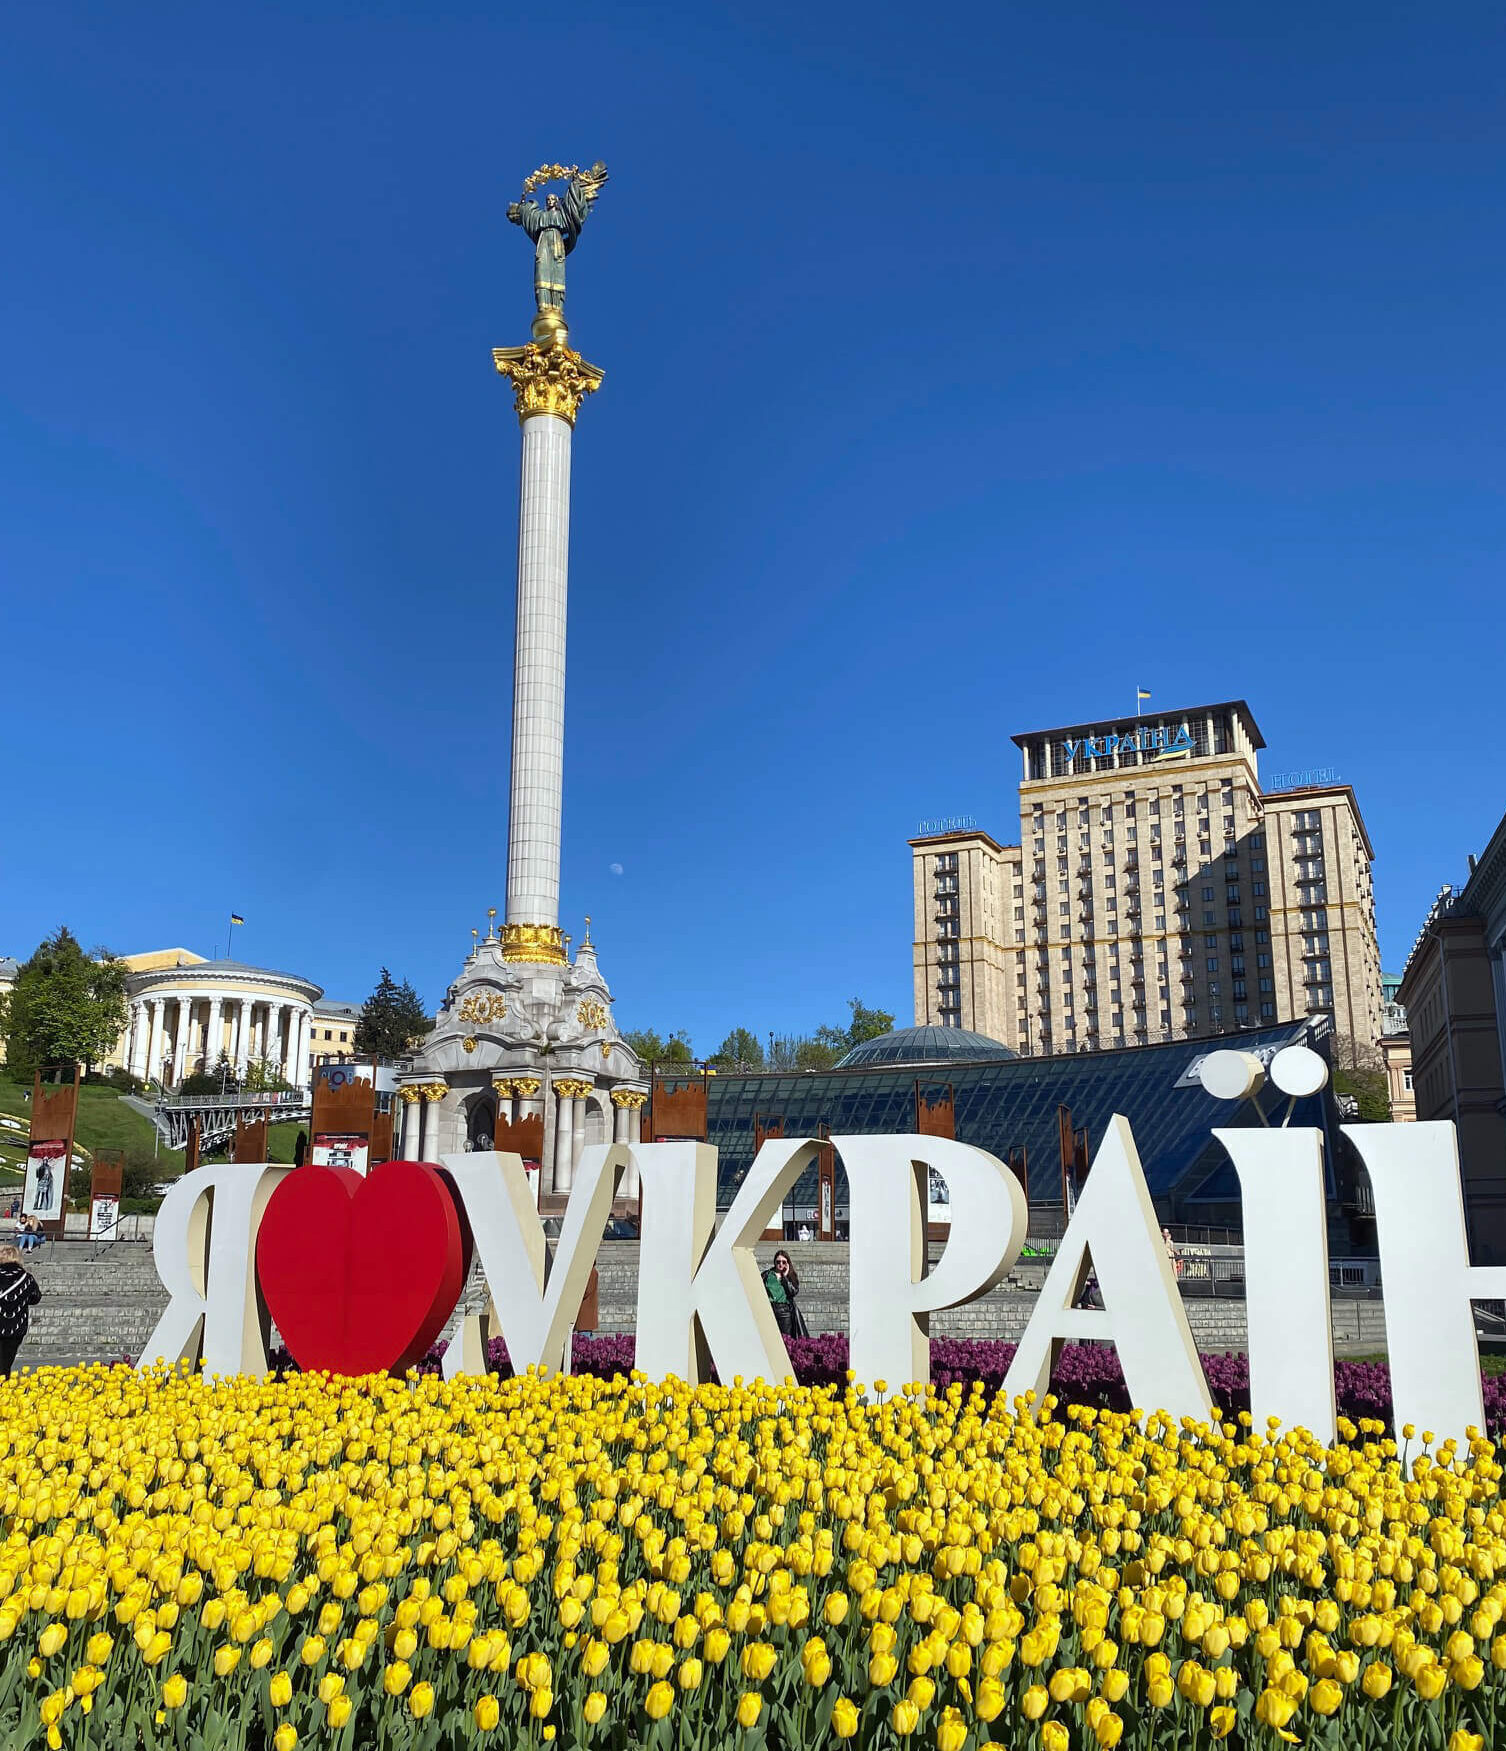 Monument of the Independence of Ukraine surrounded by springtime tulips in full bloom.